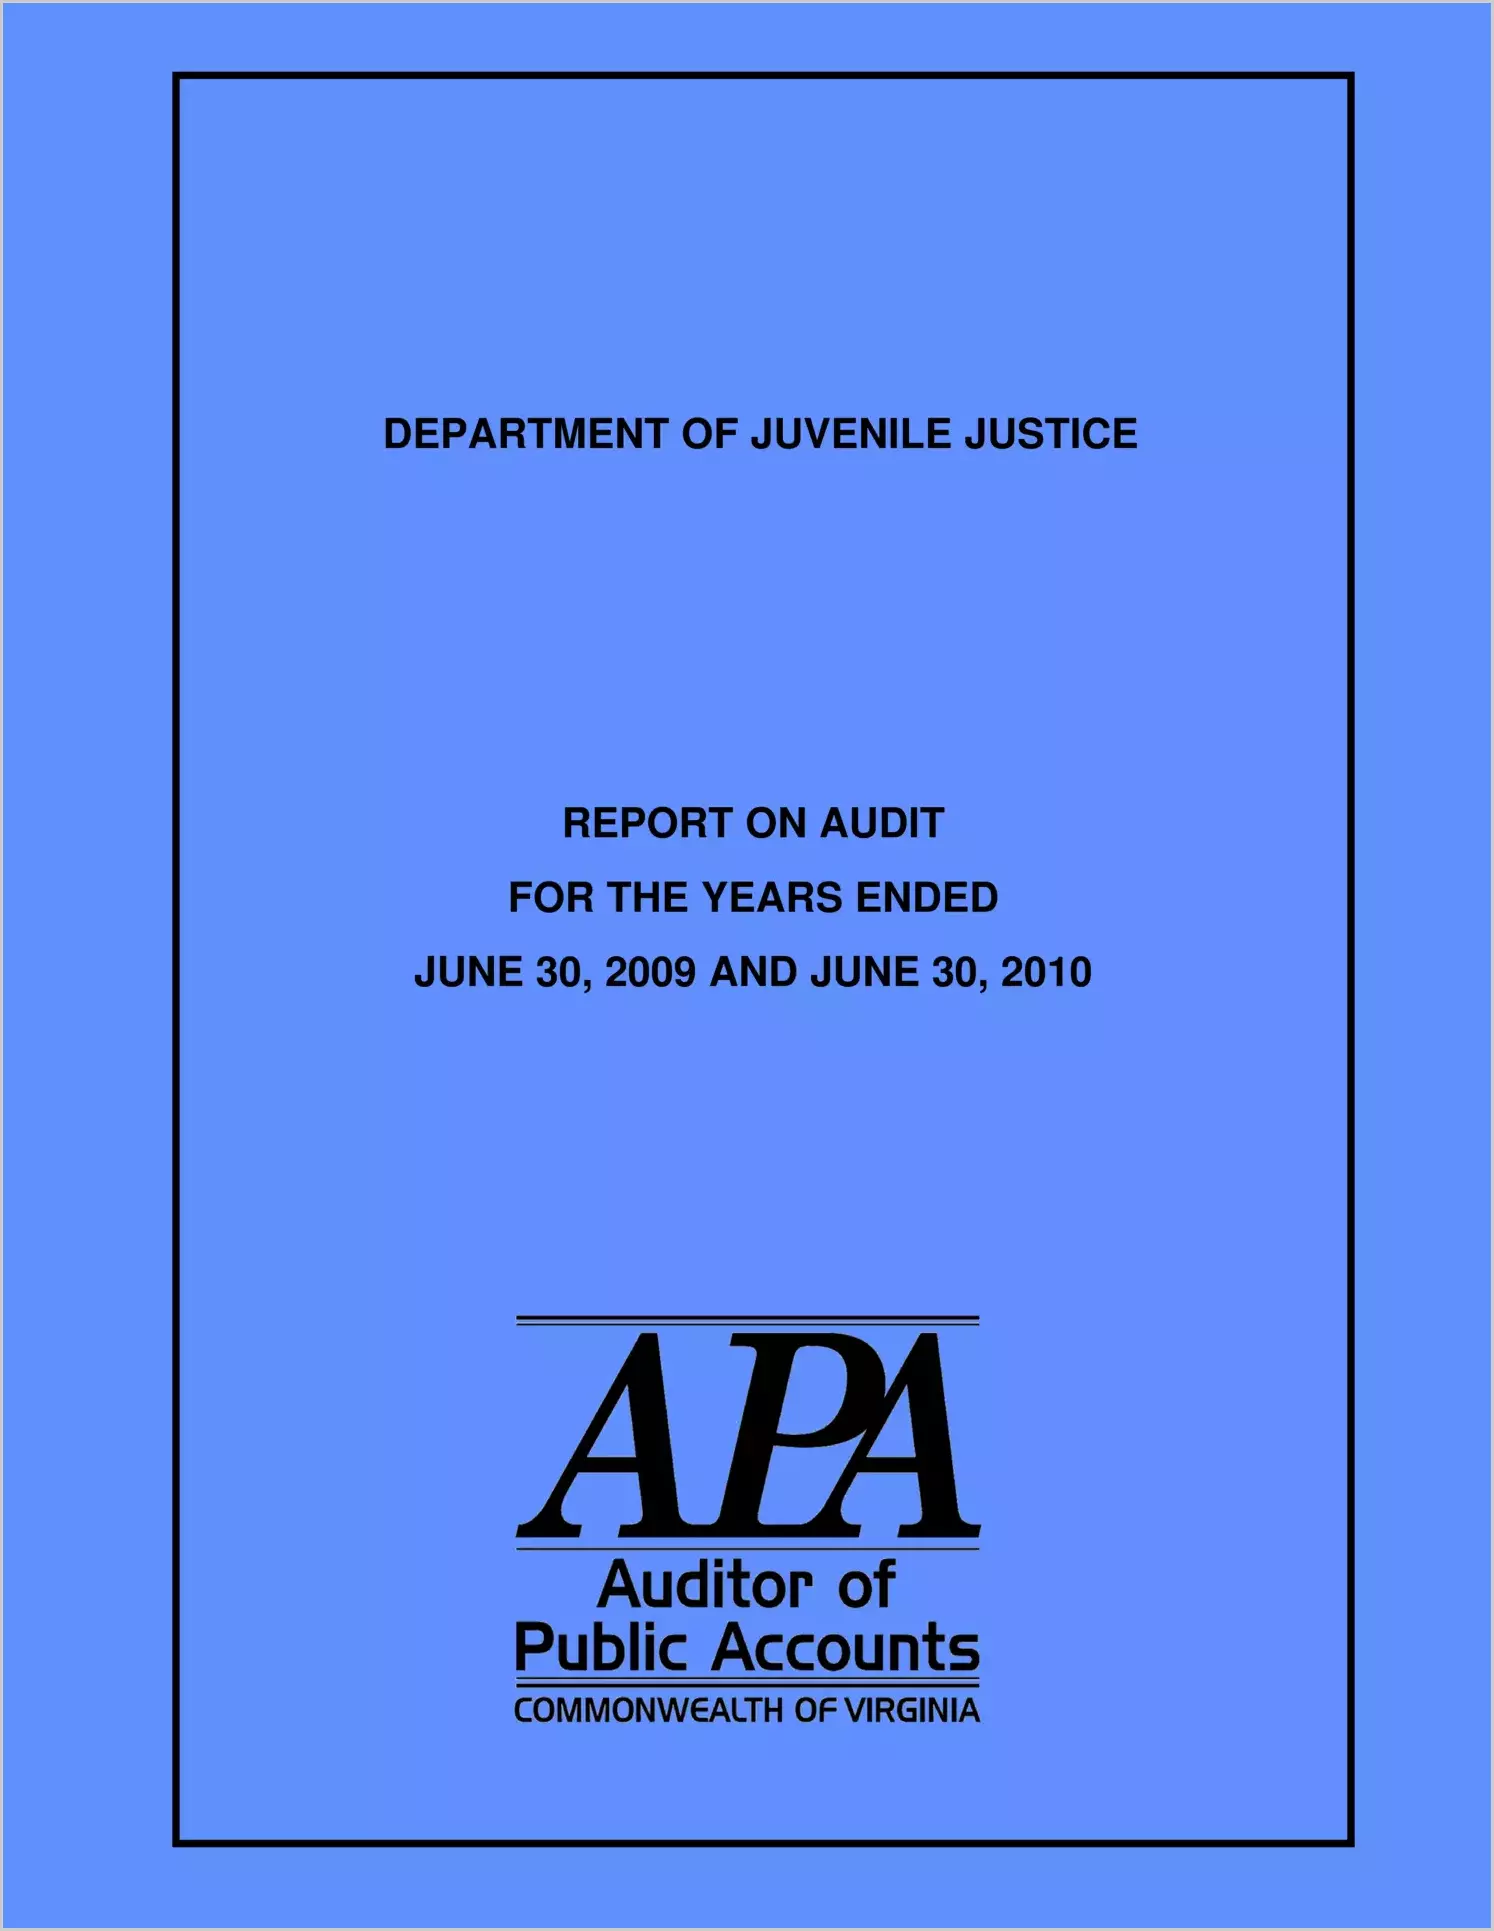 Department of Juvenile Justice for the years ended June 30, 2009 and June 30, 2010